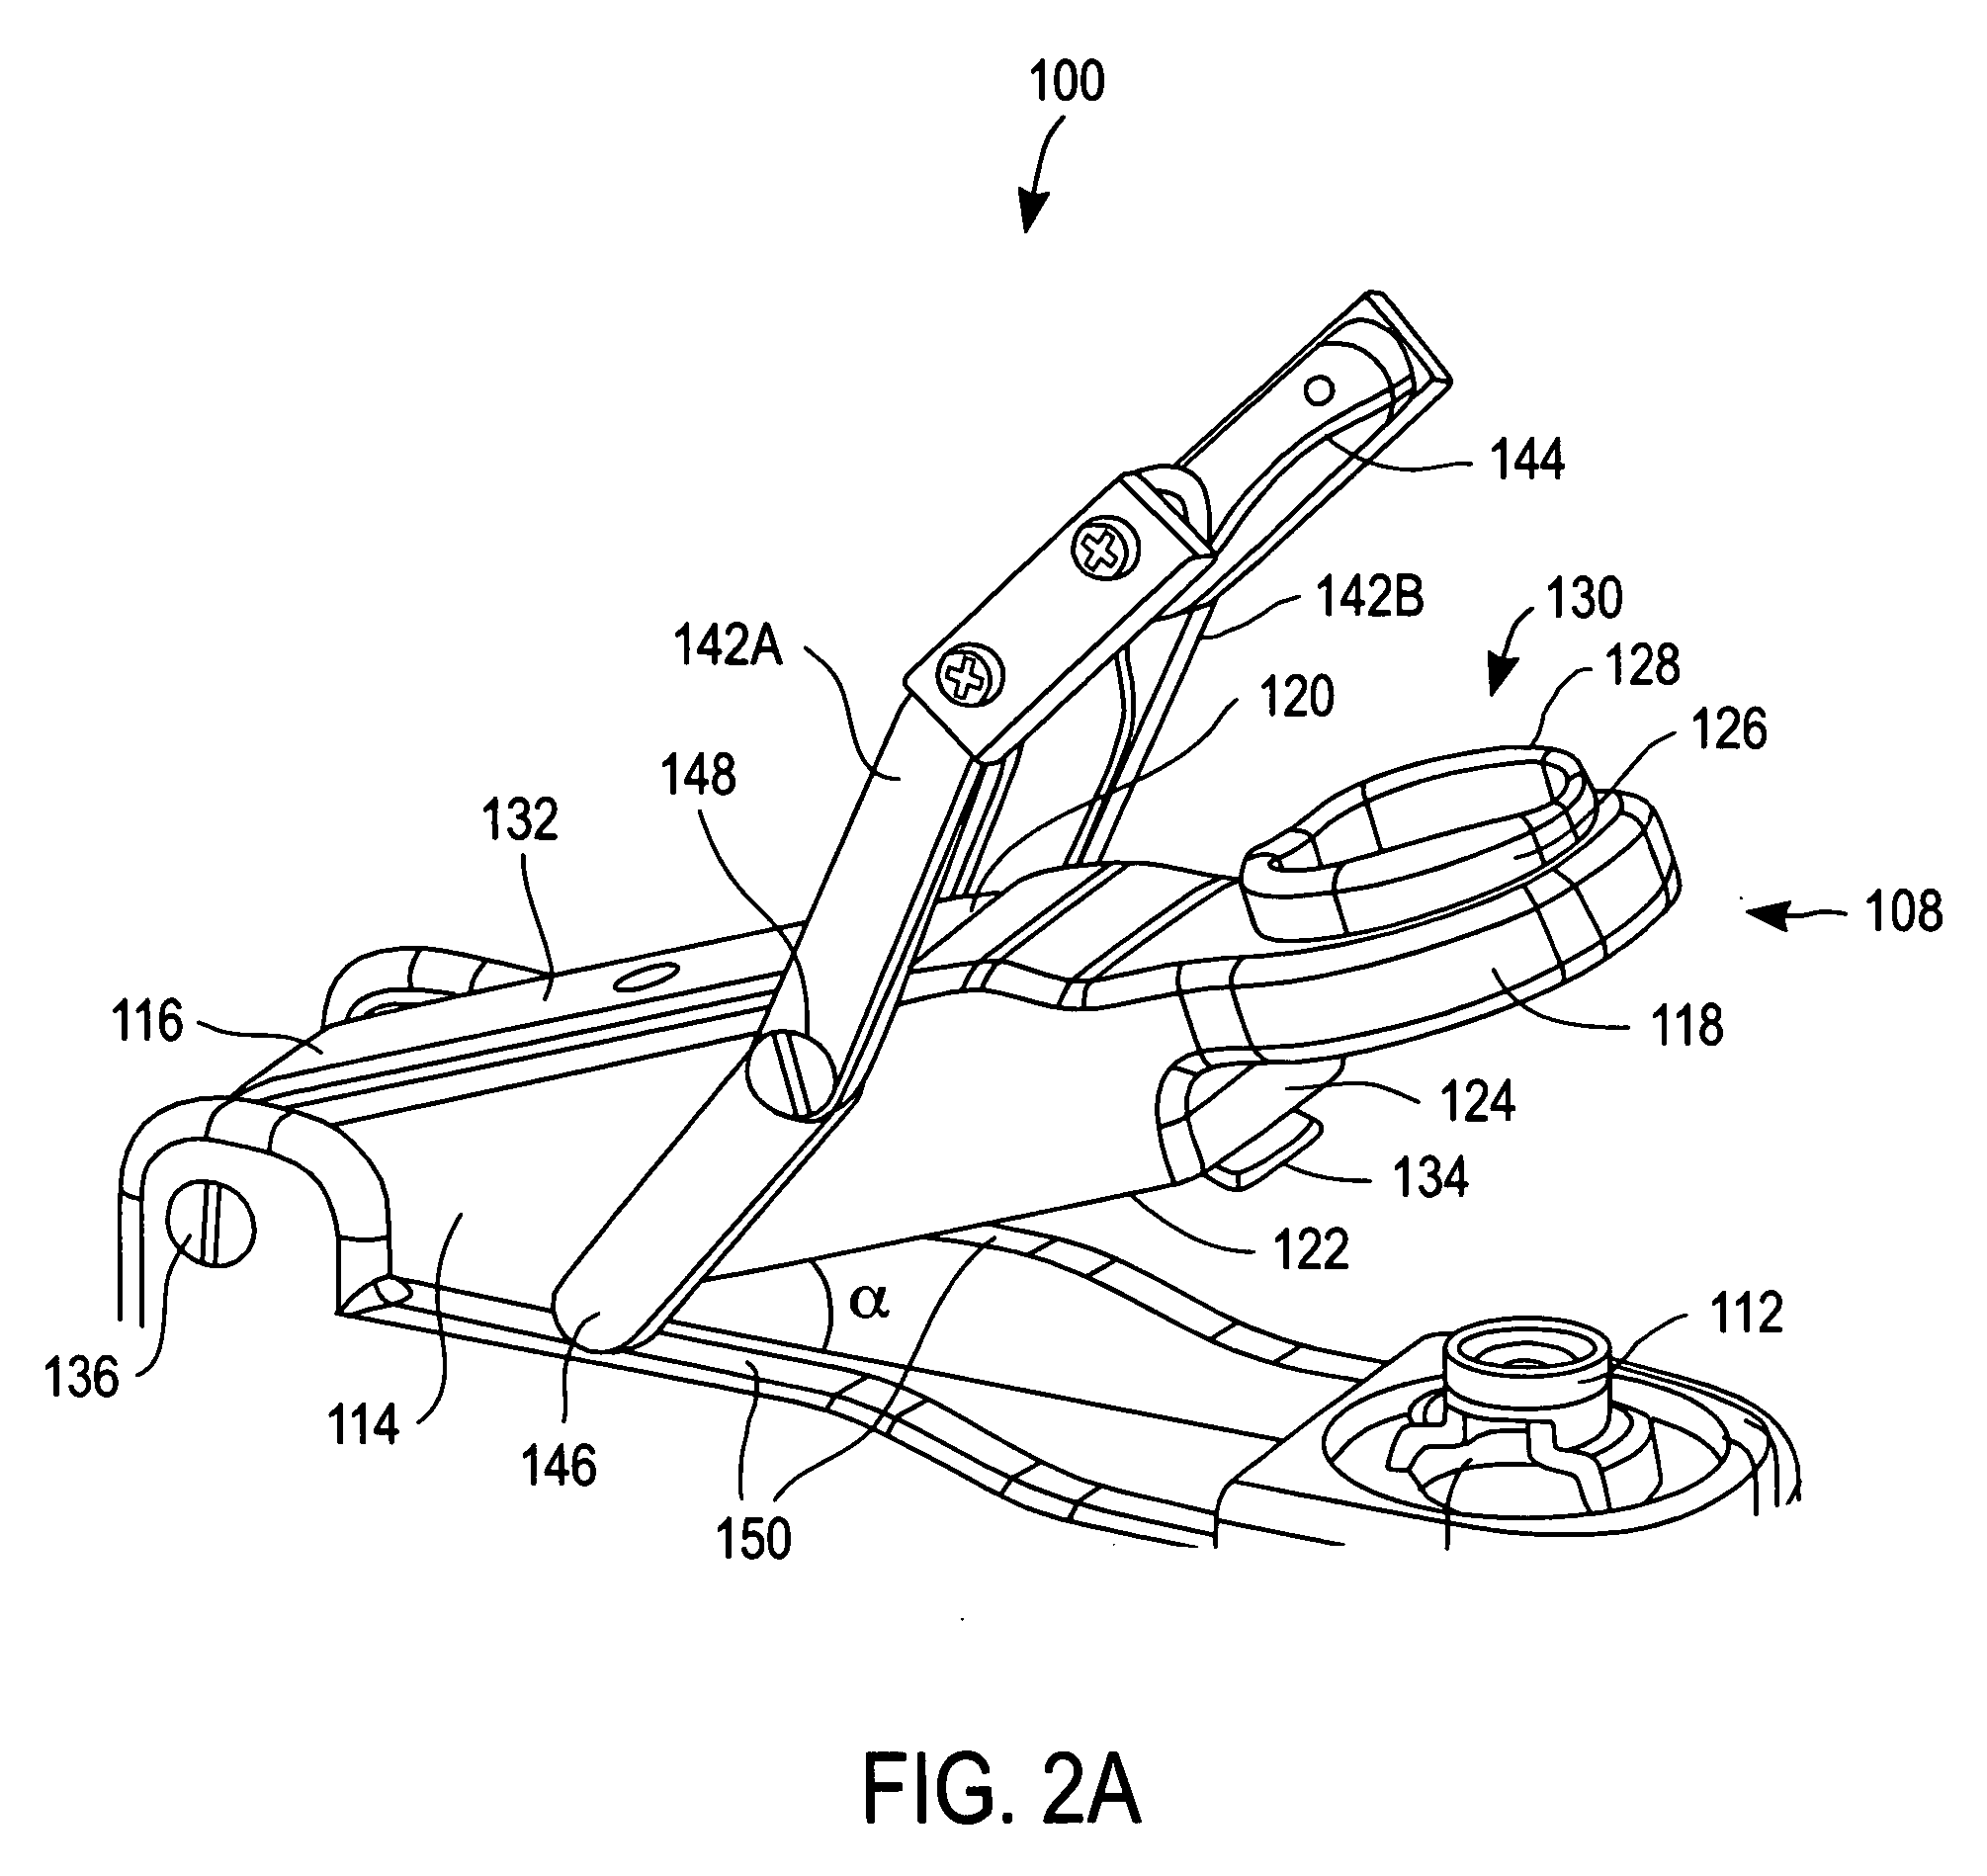 Apparatus for extracting bodily fluid